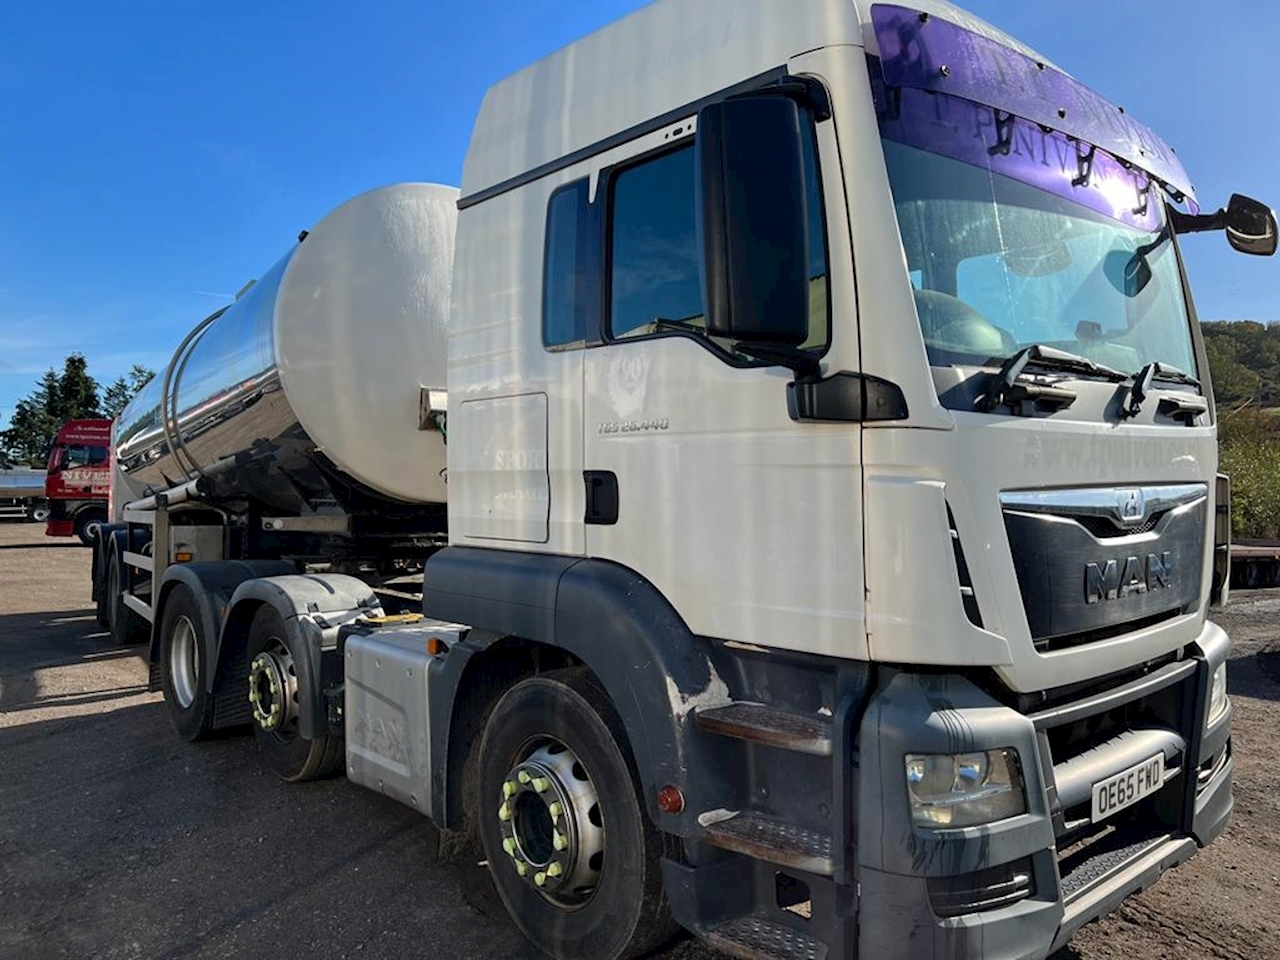 TGS 25 440 with Crossland Stainless Tanker